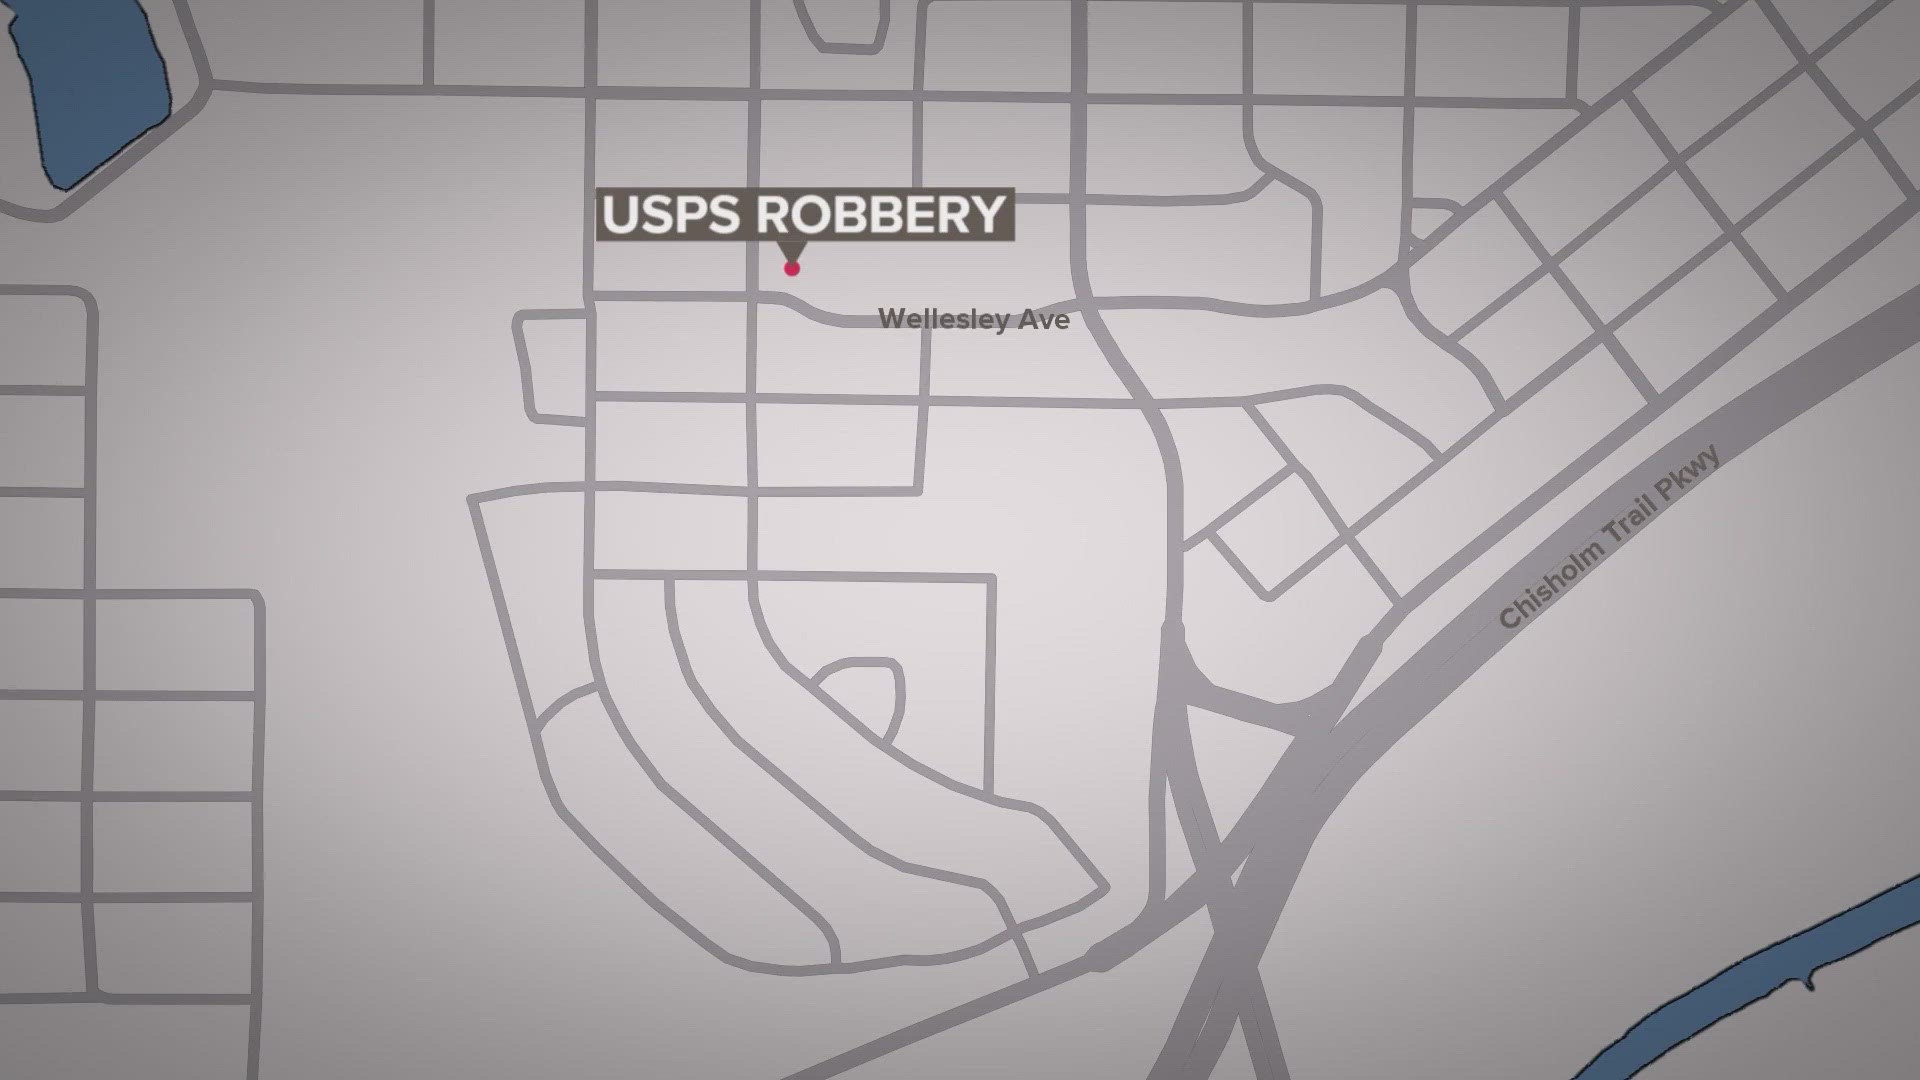 This latest robbery happened shortly before 5 p.m. March 15 near the Slate at Fort Worth Apartments in the 4700 block of Wellesley Avenue, officials say.